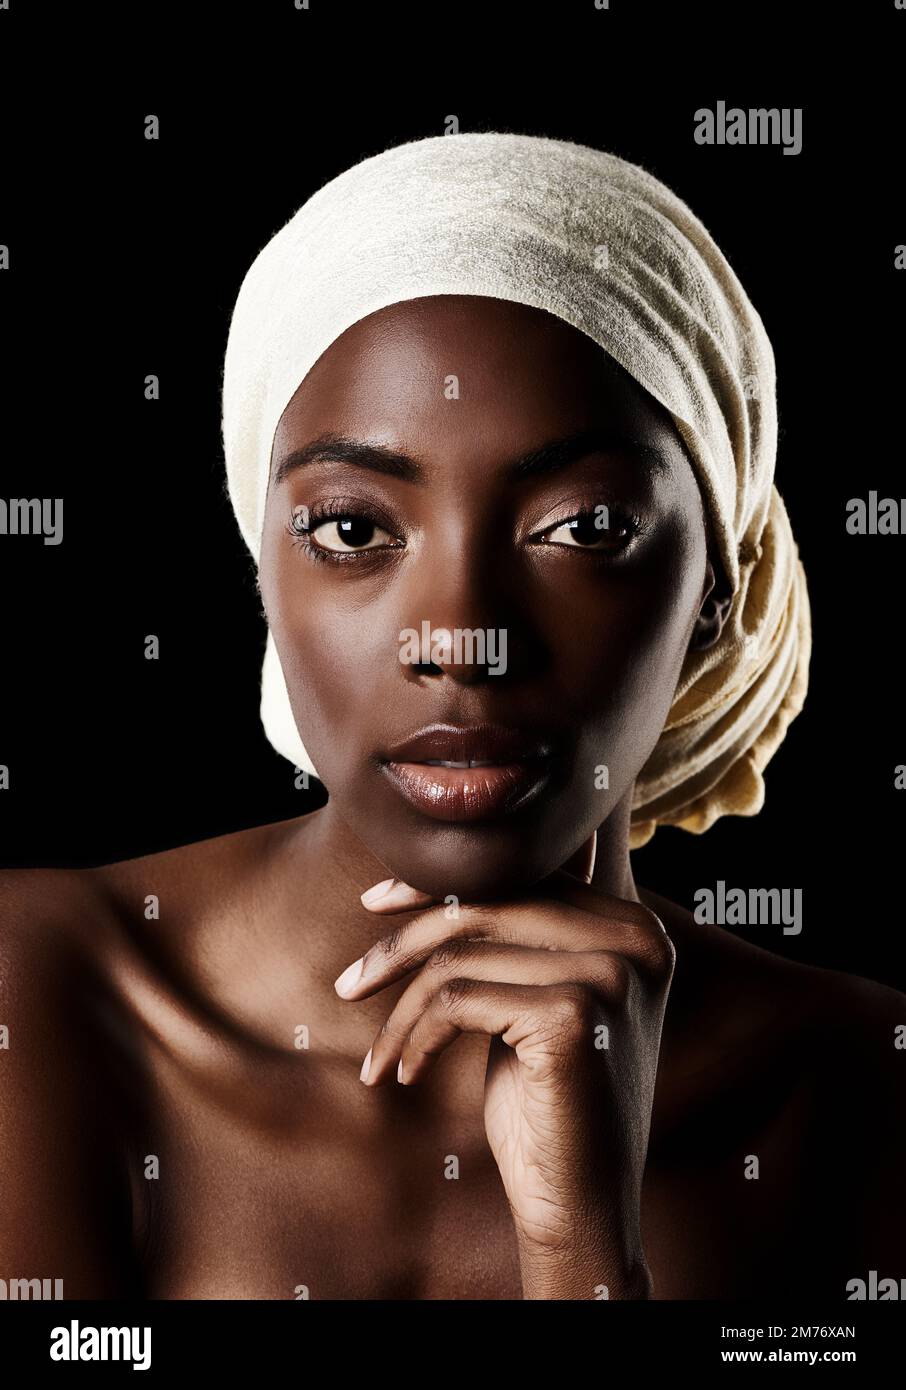 The portrait of beauty. Studio portrait of a beautiful woman wearing a headscarf against a black background. Stock Photo